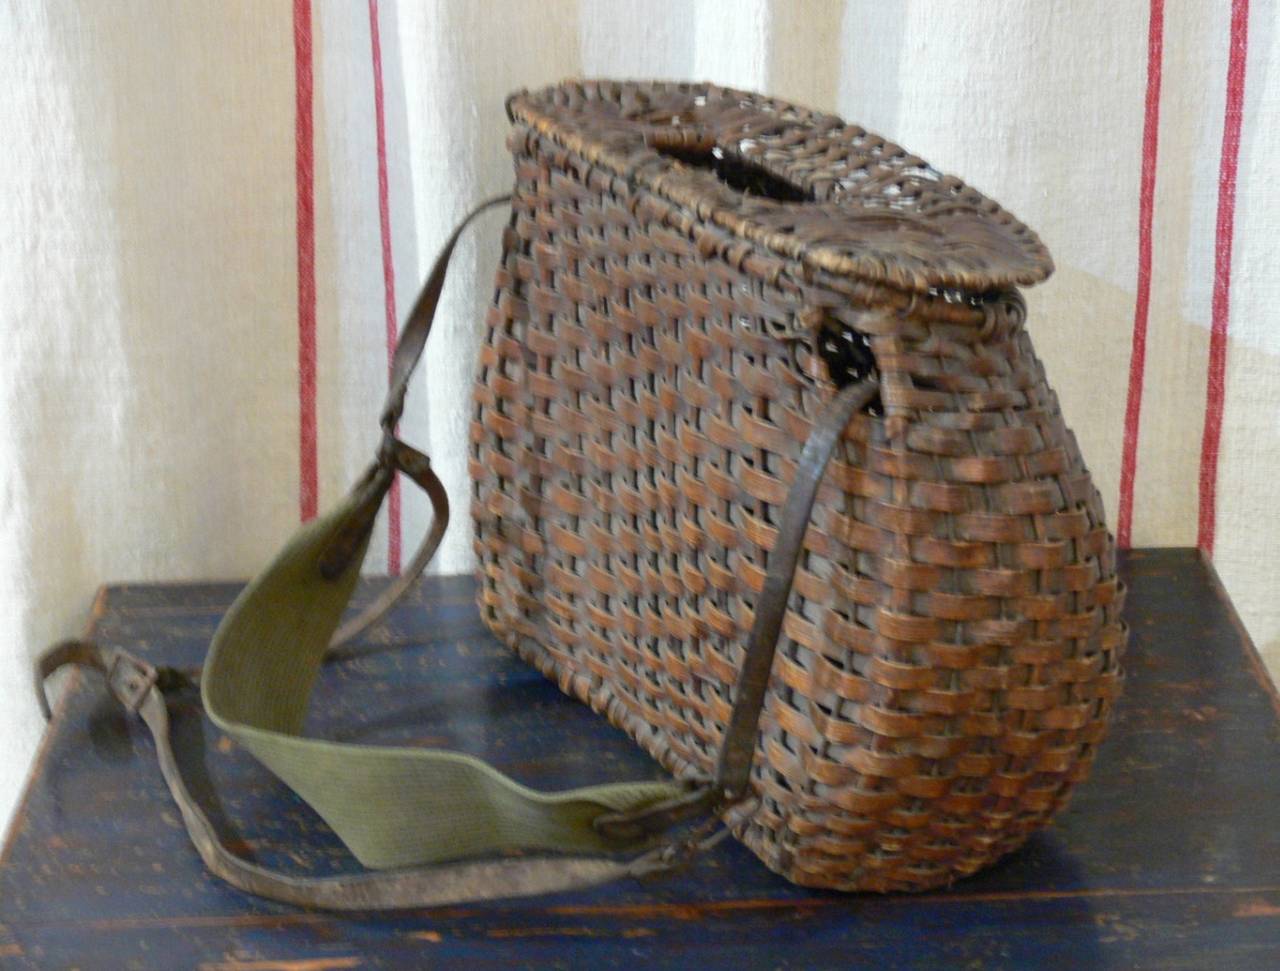 Large wicker fishing creel with buttock shape. Strap of leather and cotton.